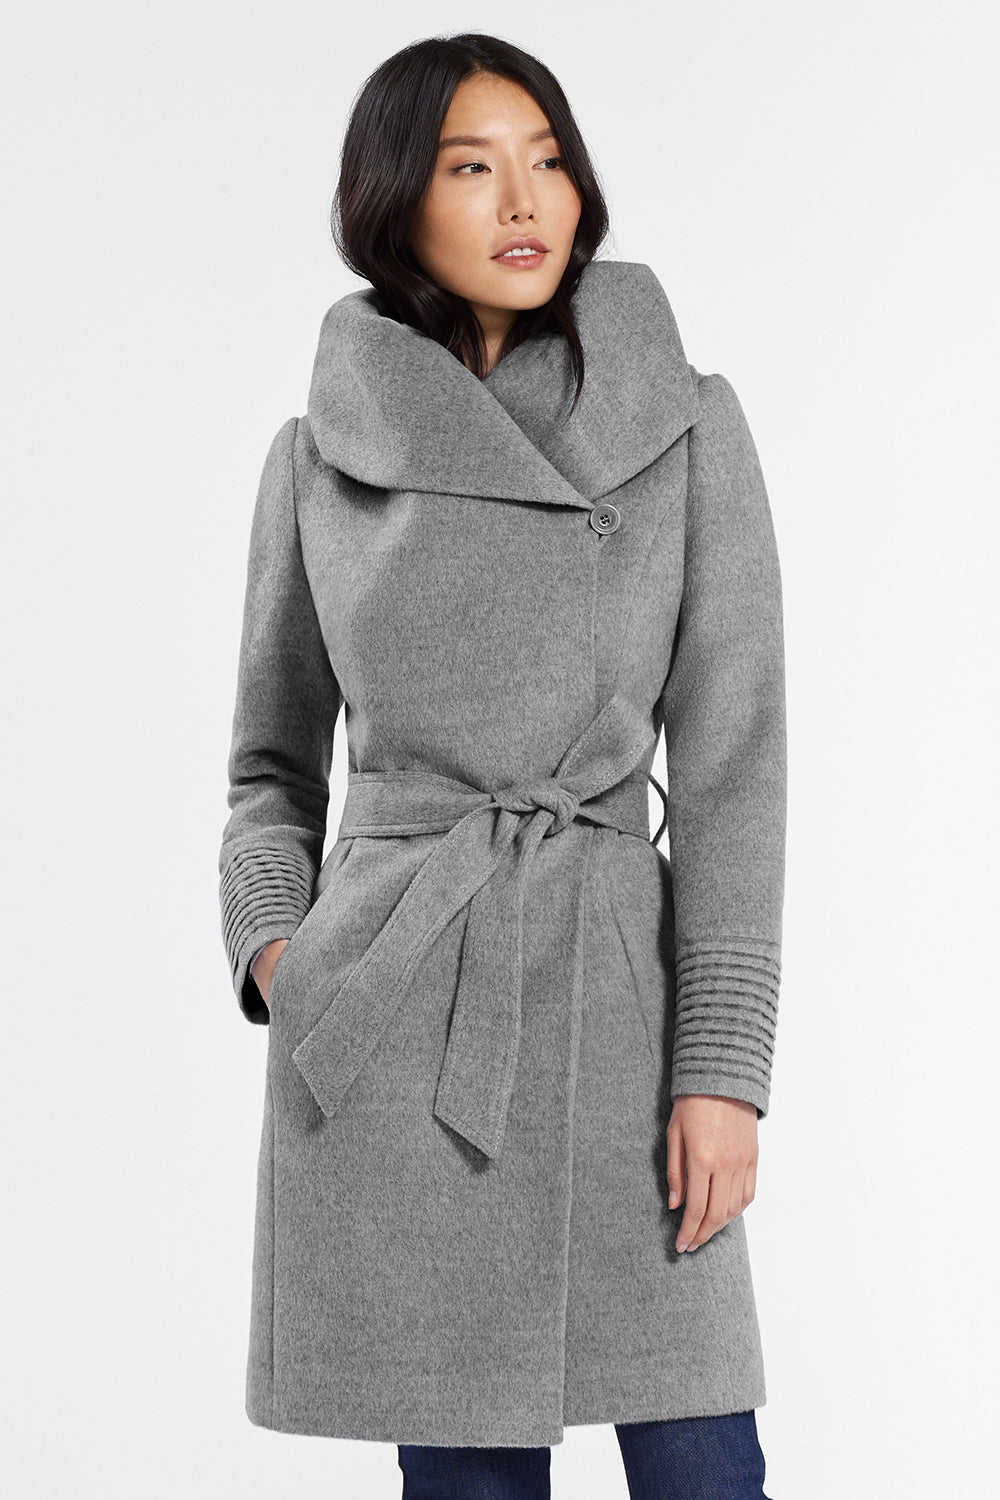 Jackets - Clothings  Hooded wrap coat, Fashion today, Todays outfit